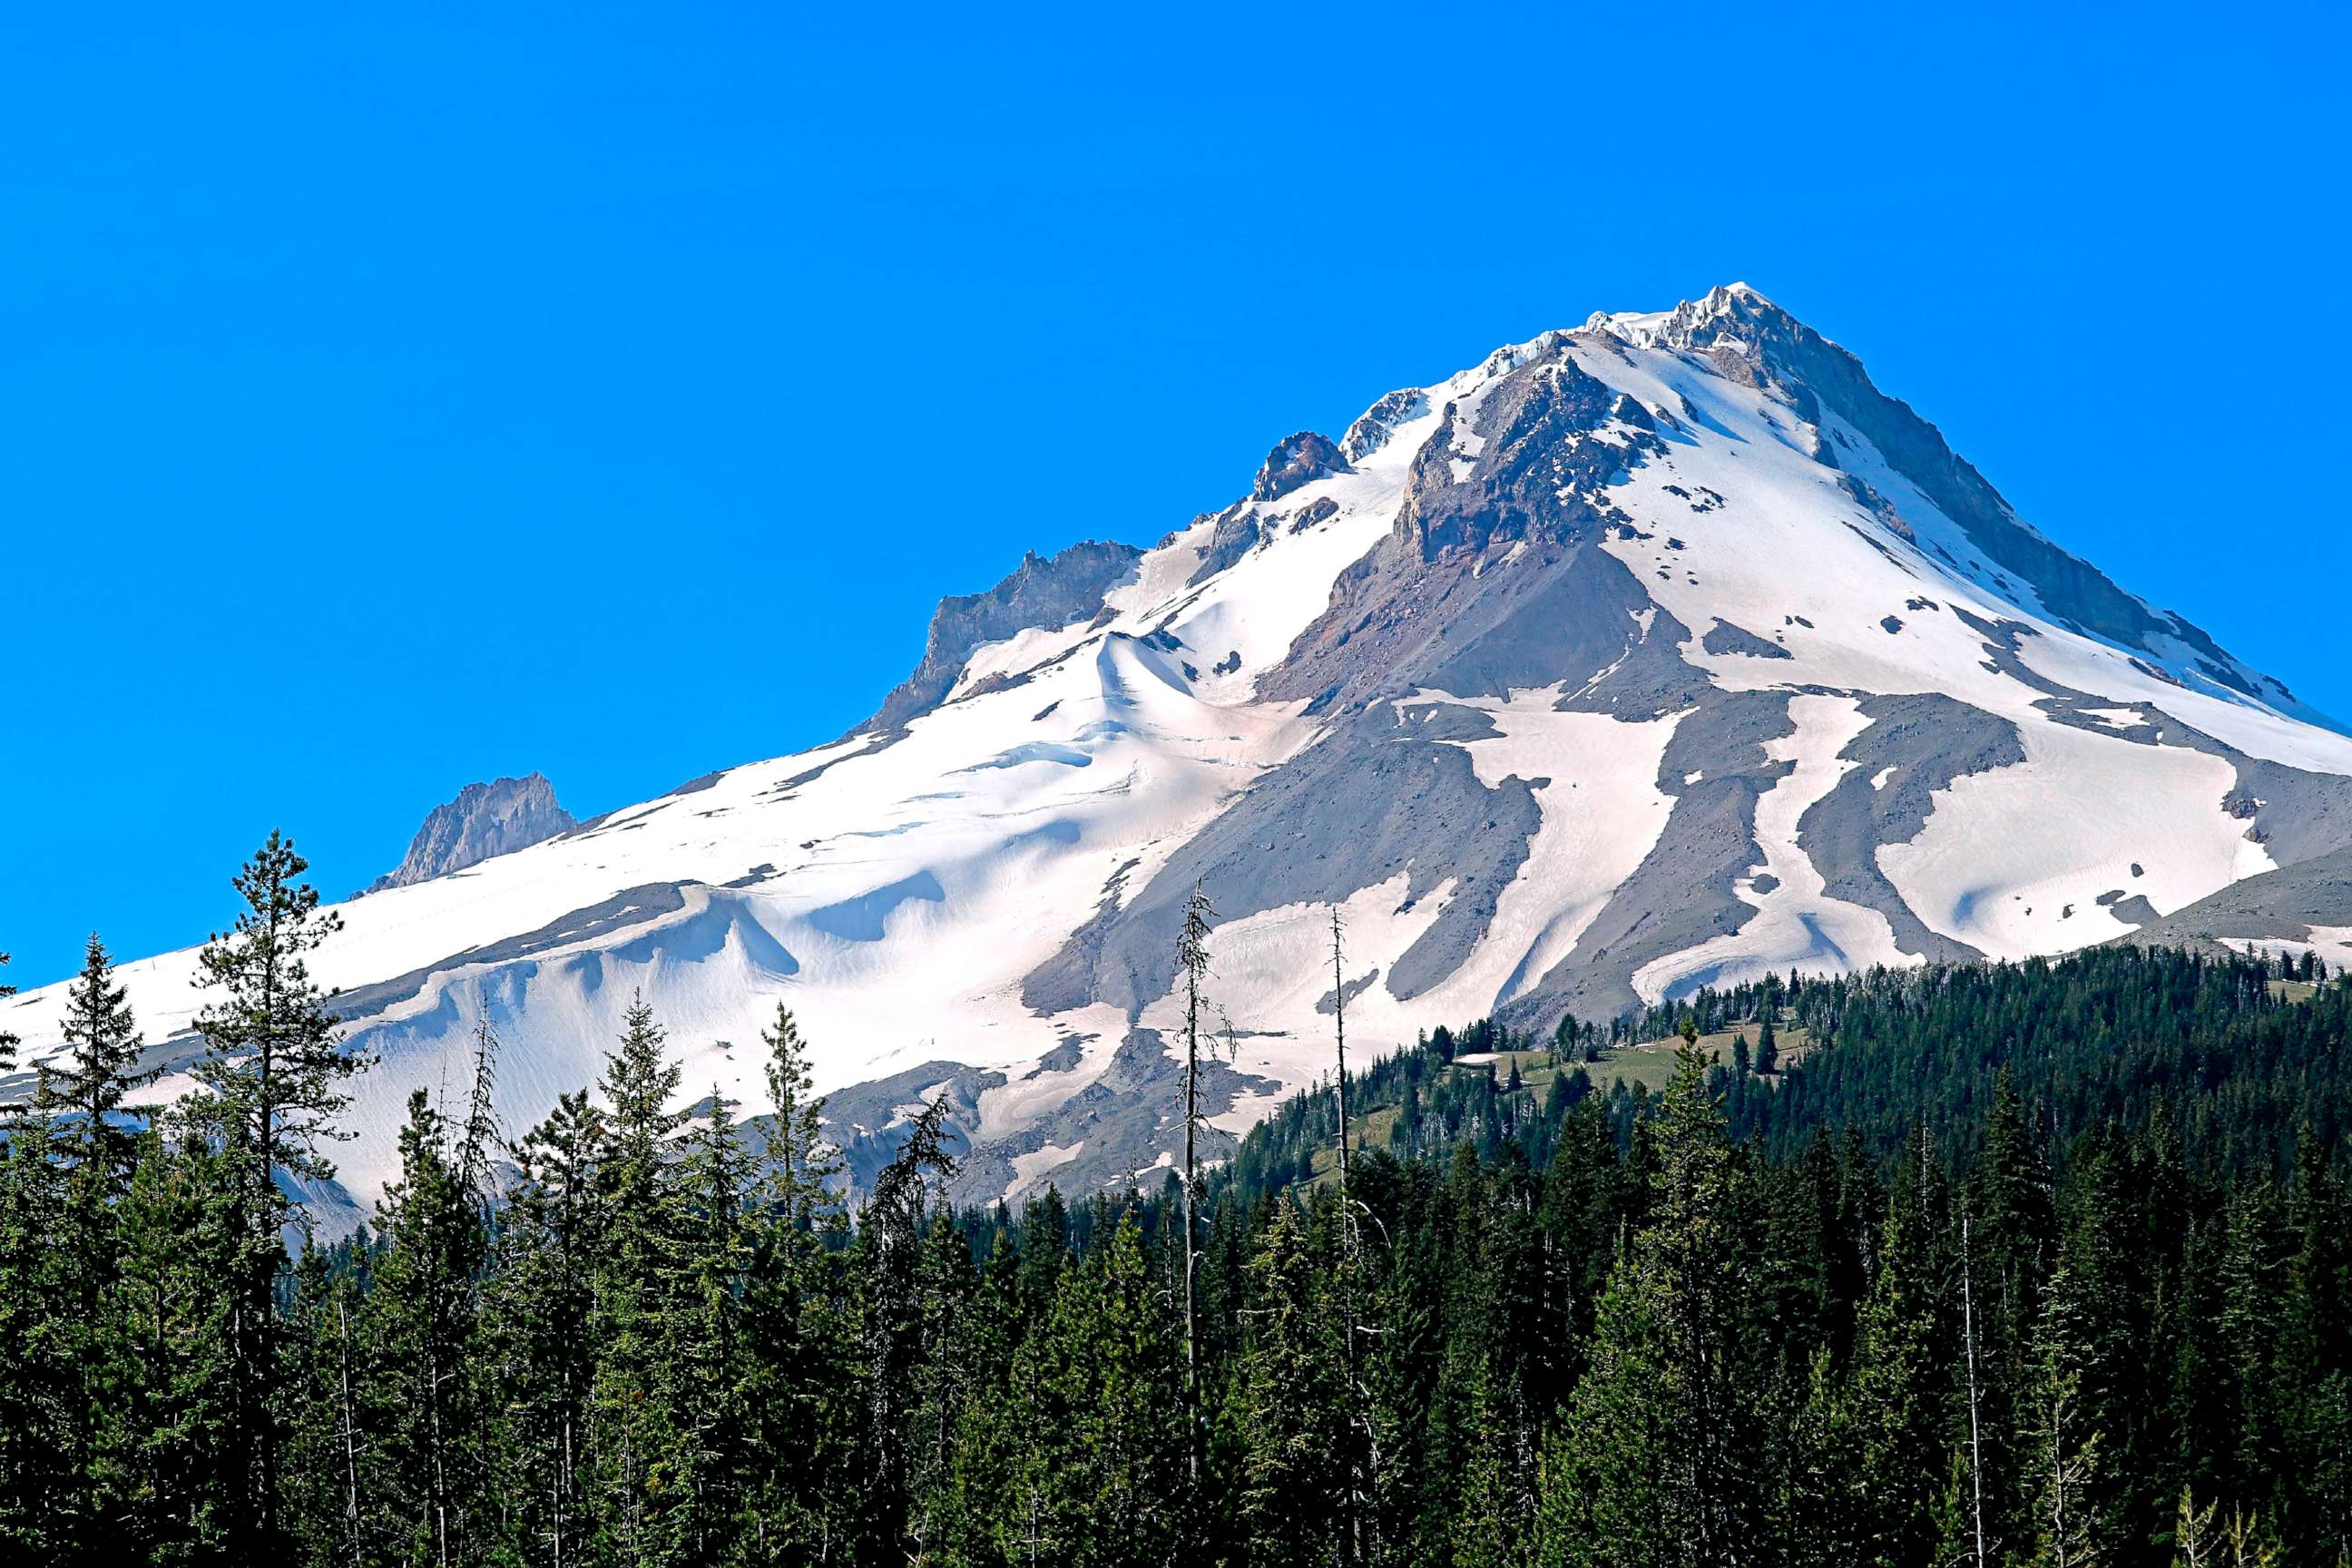 PHOTO: Snowy Mount Hood in the Cascade Mountains of northern Oregon.